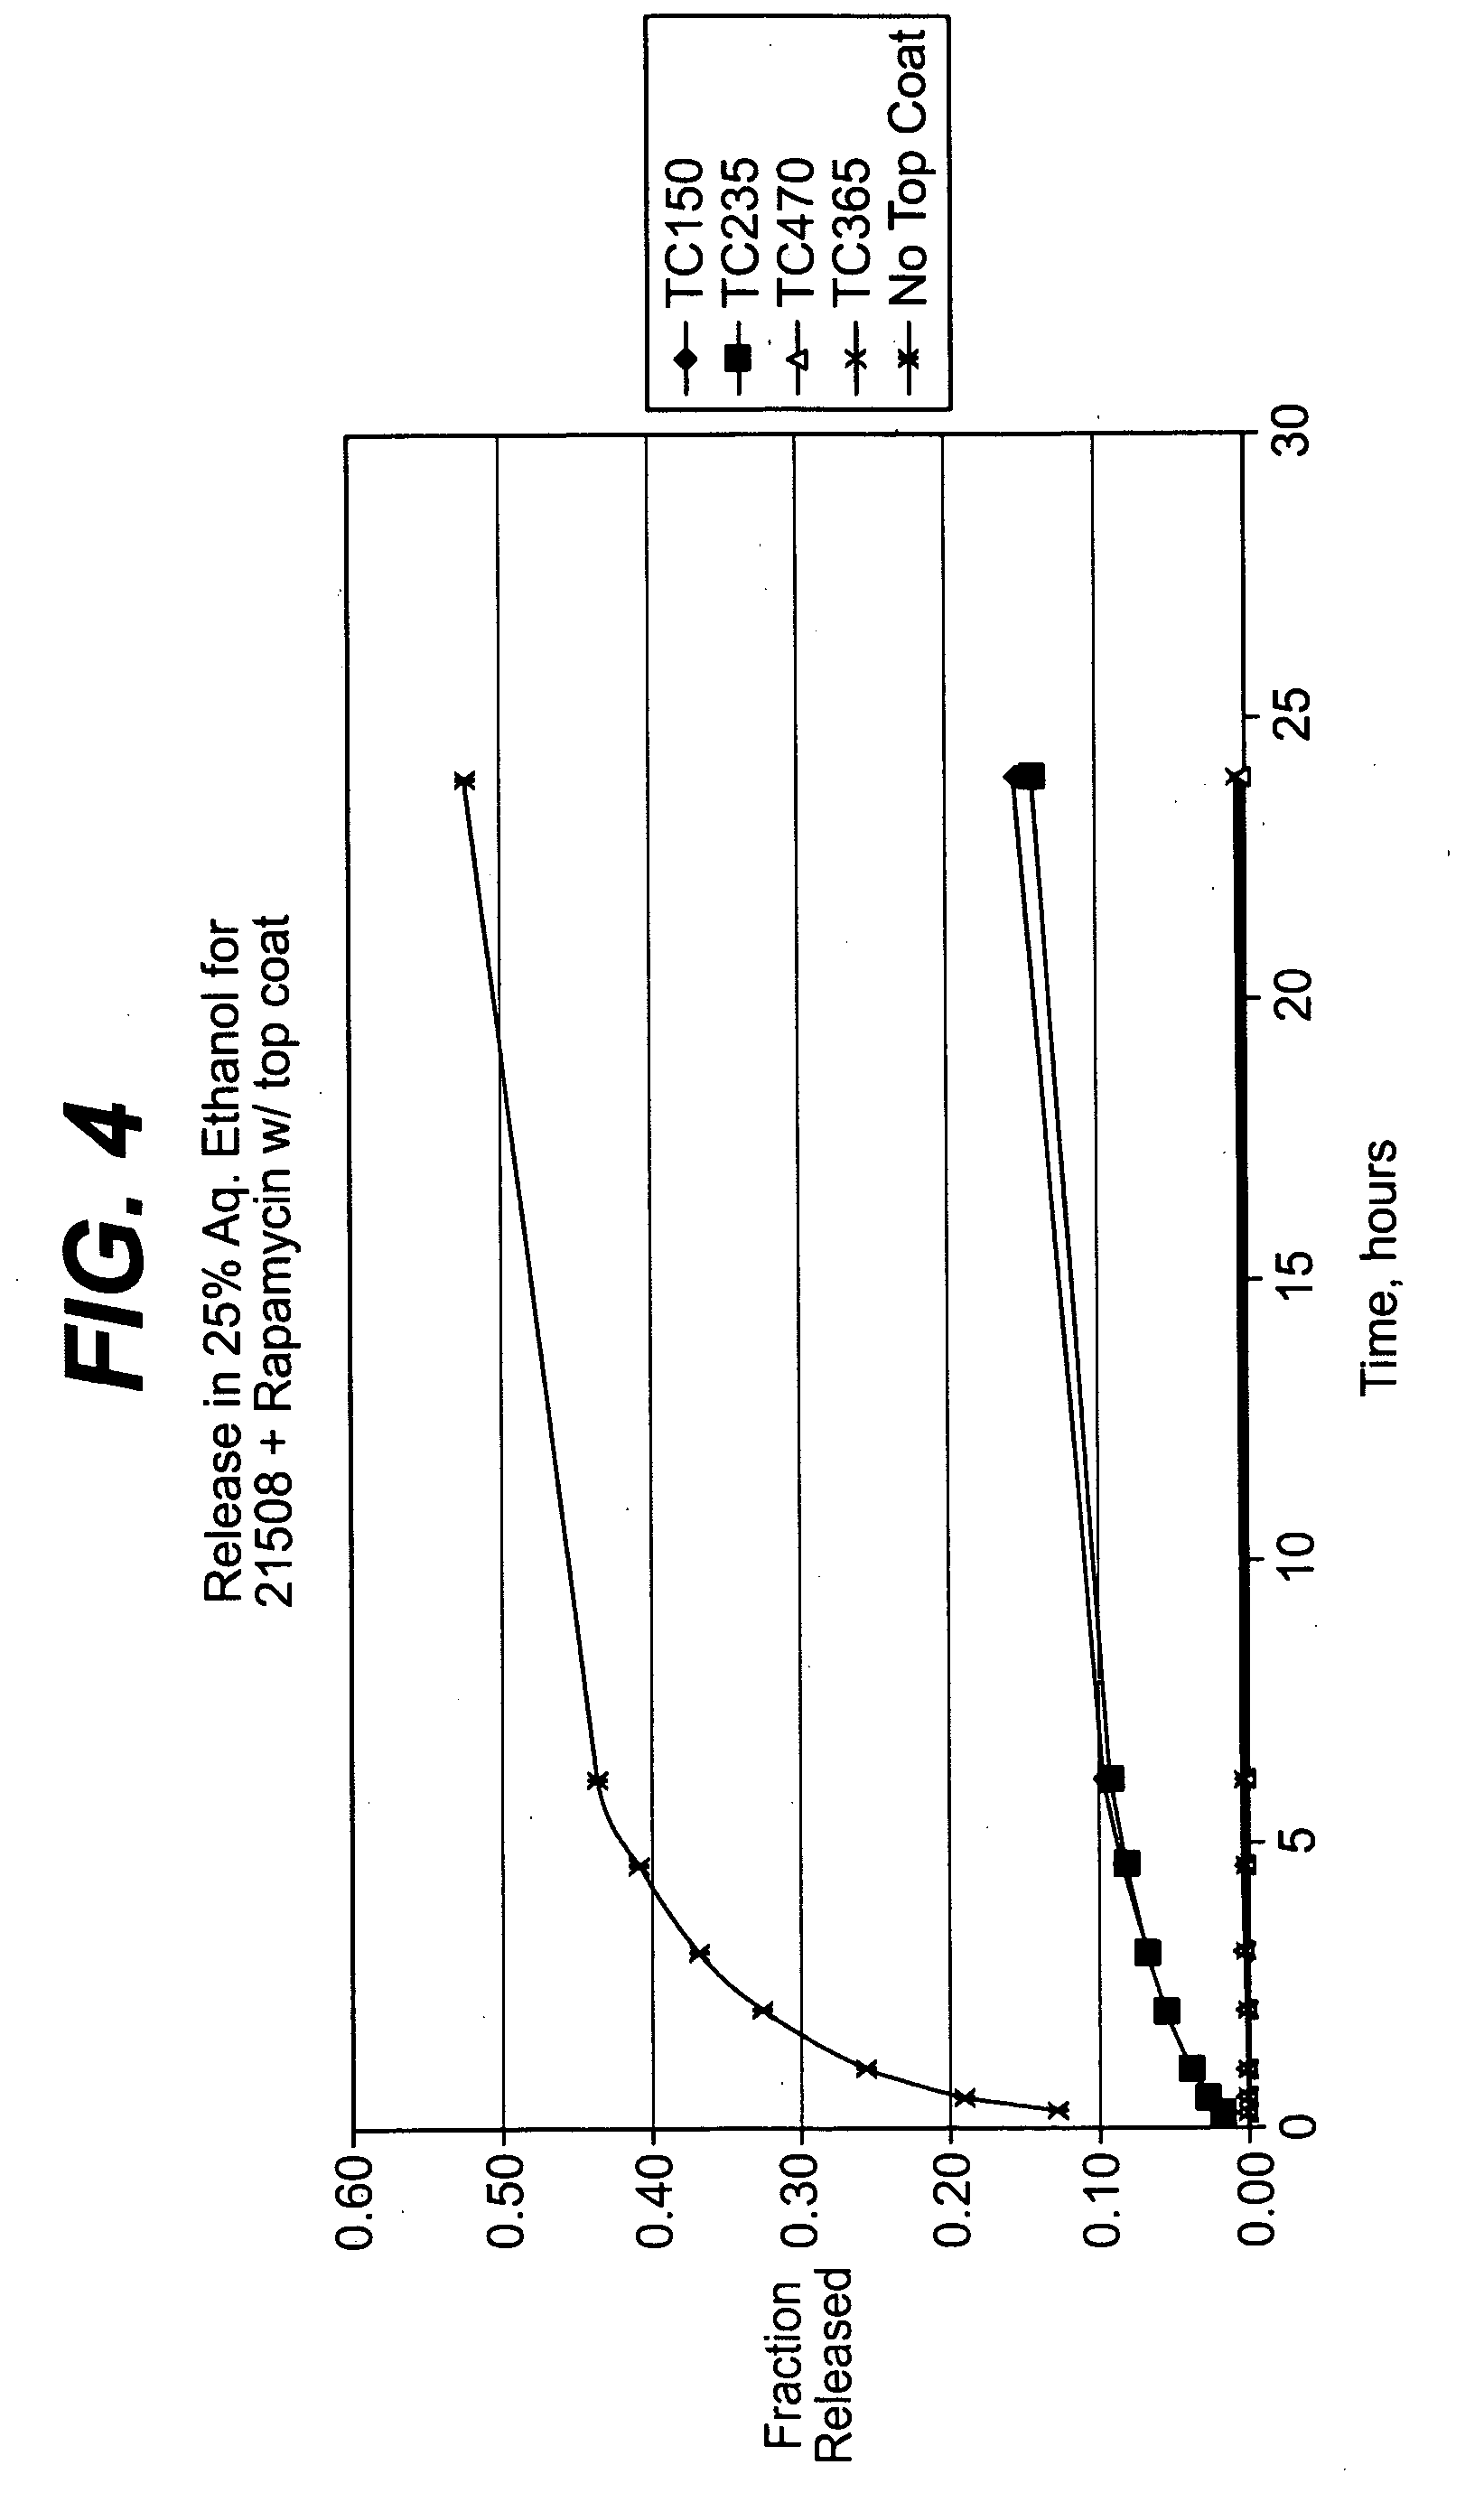 Solution formulations of sirolimus and its analogs for CAD treatment